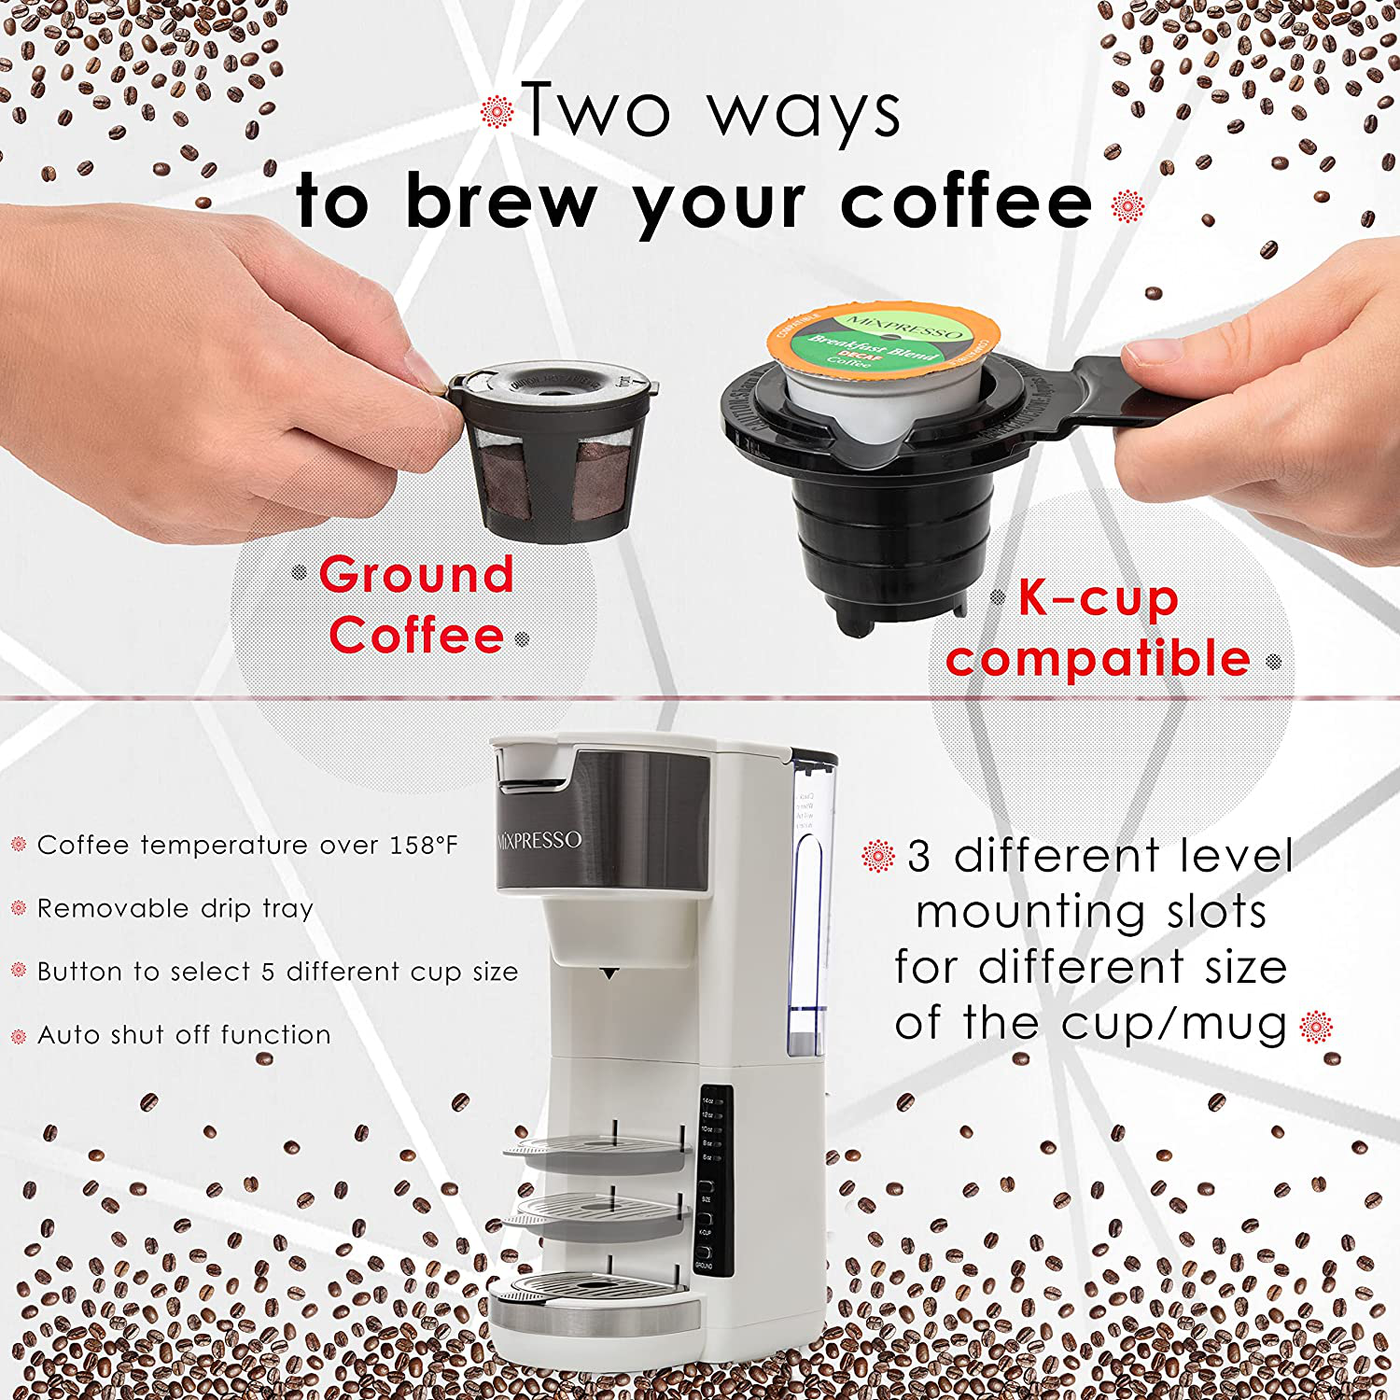 Mixpresso Single Serve 2 in 1 Coffee Brewer K-Cup Pods Compatible & Ground Coffee,Compact Coffee Maker Single Serve With 30 oz Detachable Reservoir, 5 Brew Size and Adjustable Drip Tray